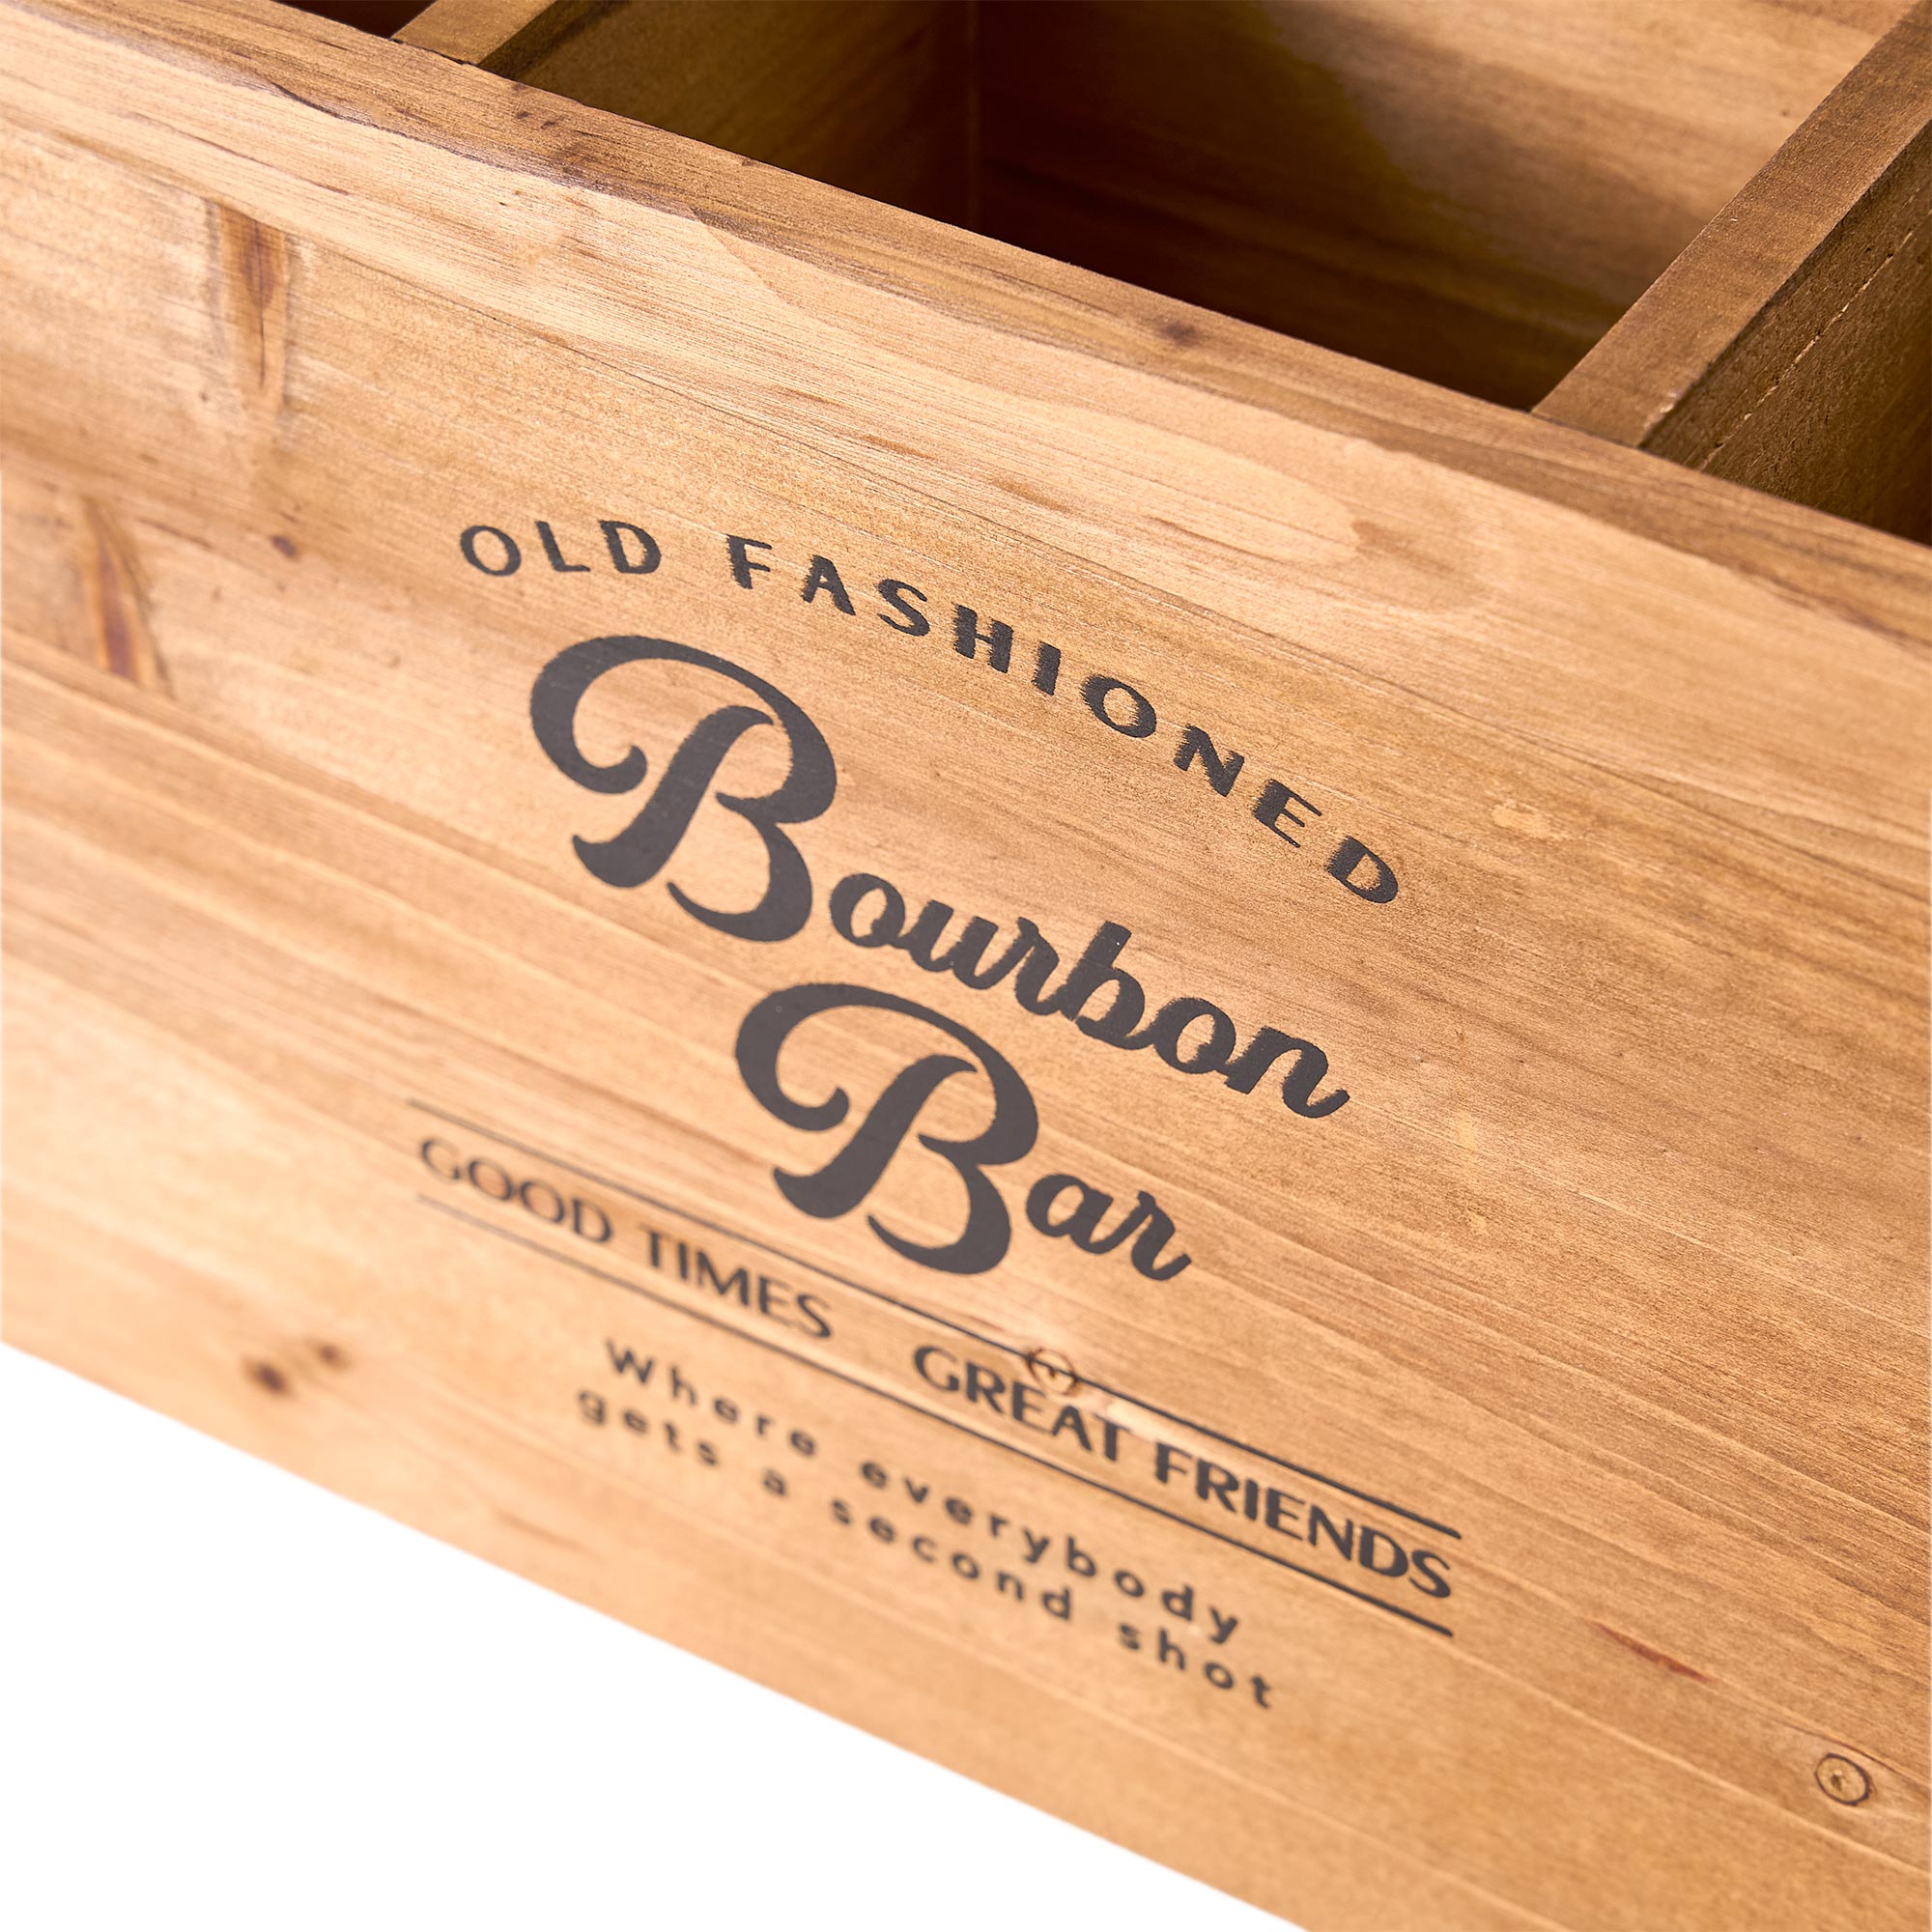 The Bourbon Bar Wood Crate Bottle Holder with Metal Handles - 7